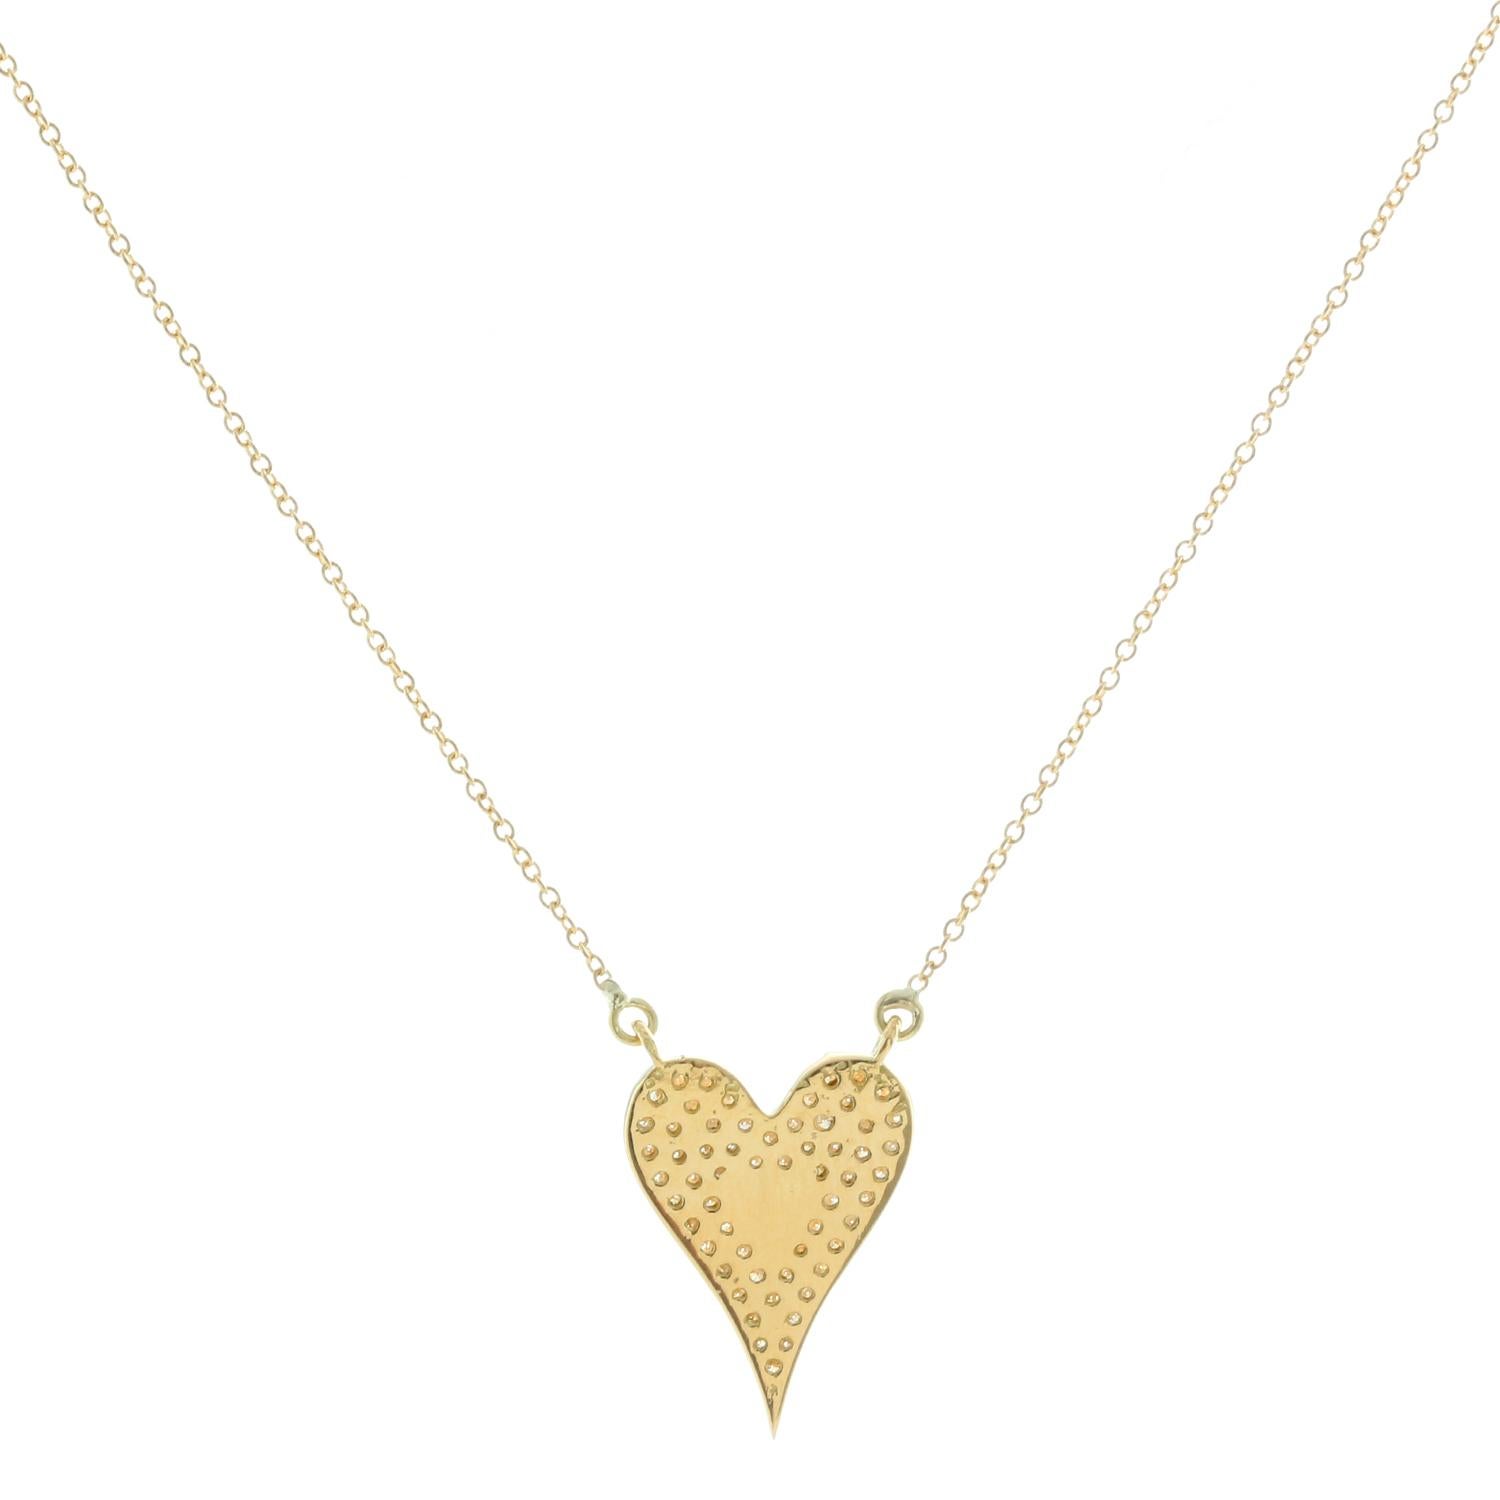 18K Yellow Gold Diamond Heart Necklace  - White diamond heart pendant weighing .60cts. with 18K Yellow gold chain. Total weight 4.9 grams.  .